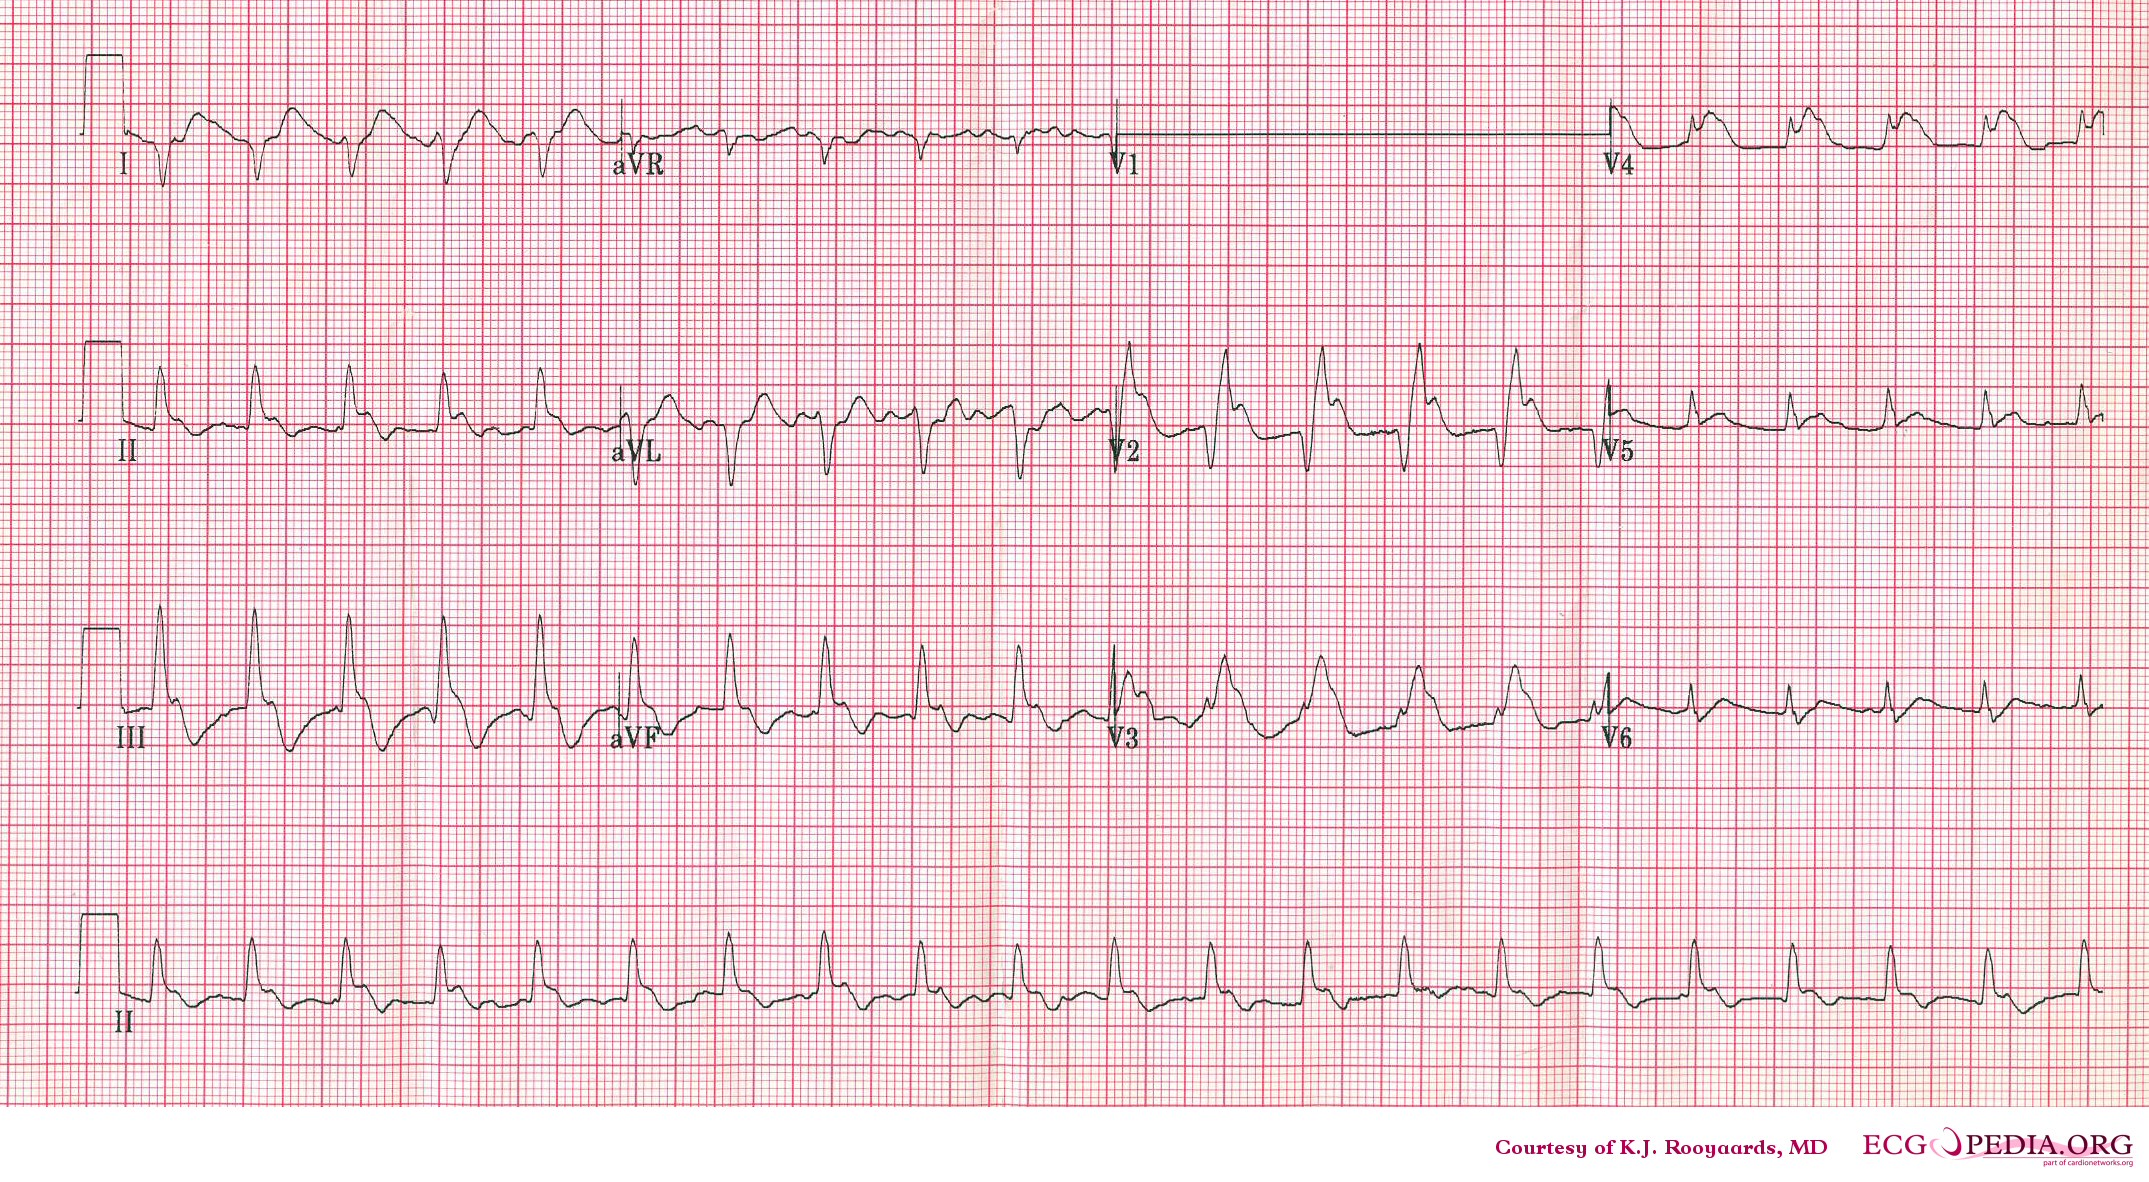 ECG of a patient with pulmonary embolism showing sinus tachycardia and right axis deviation.Image courtesy of ecgpedia